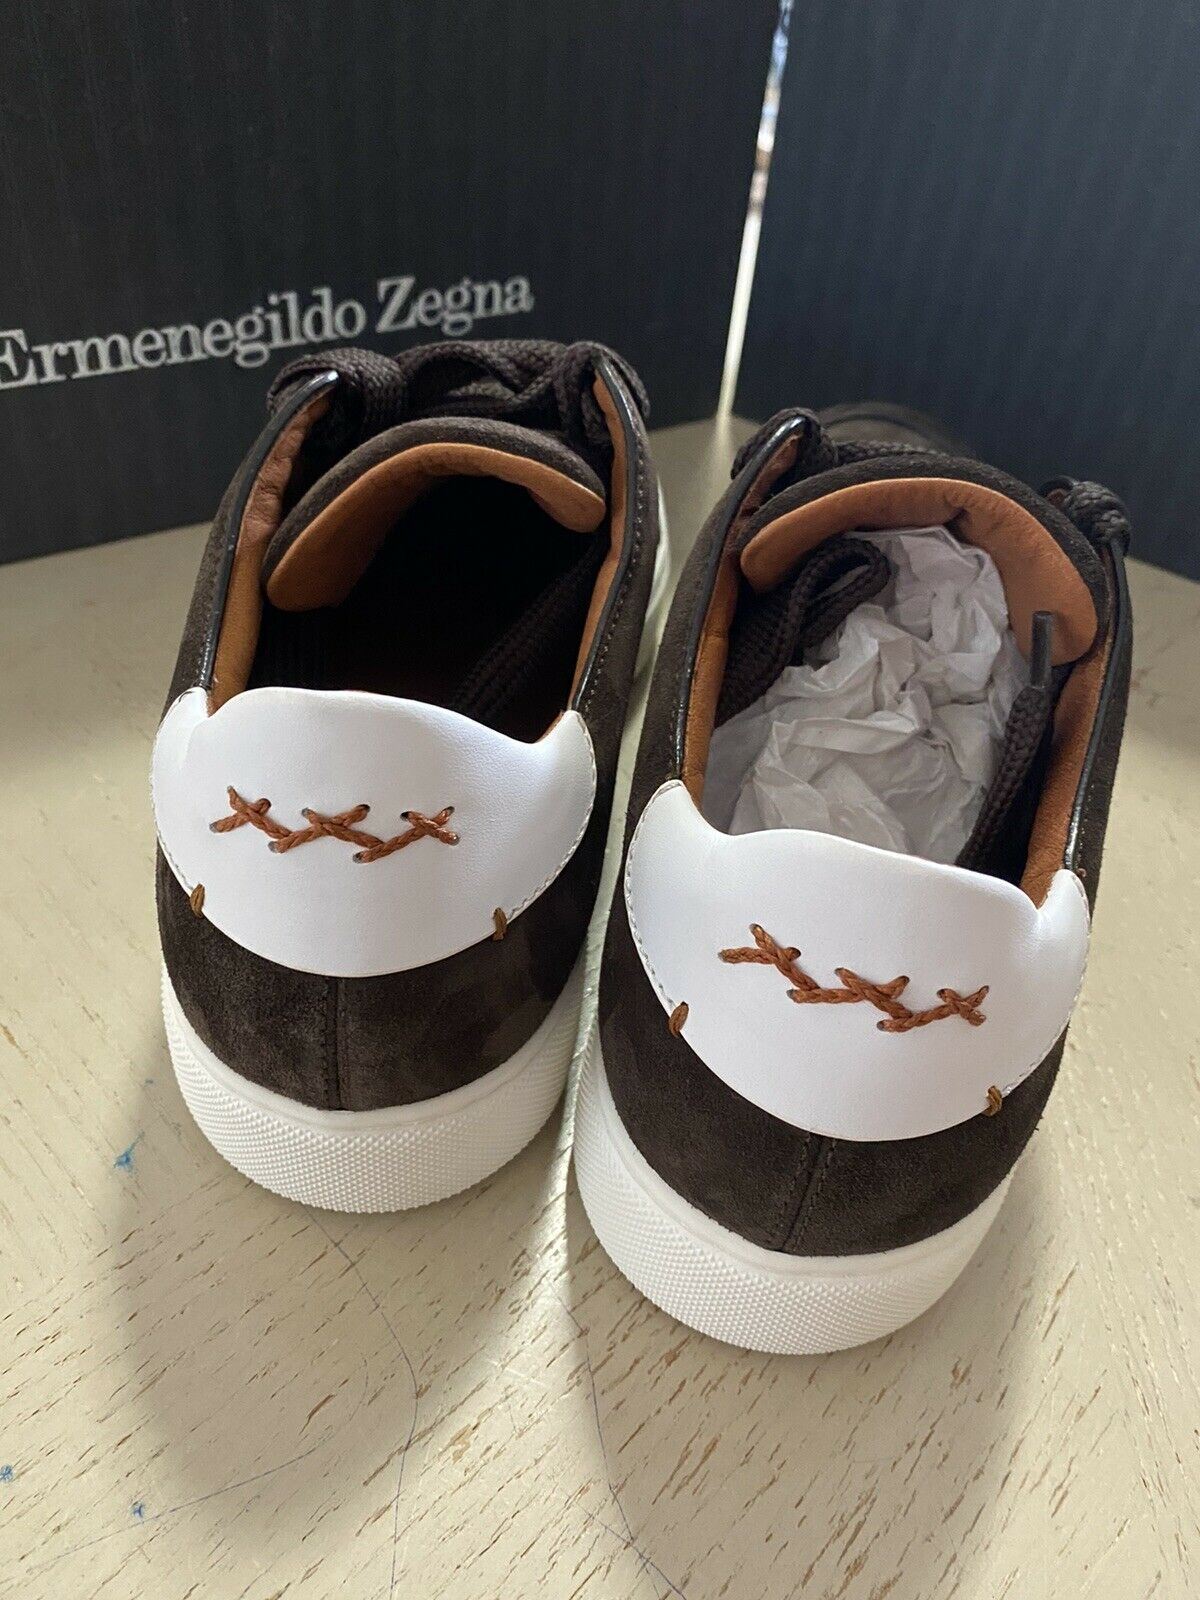 New $850 Ermenegildo Zegna Couture Suede/Leather Sneakers Shoes Dark Brown 10 US